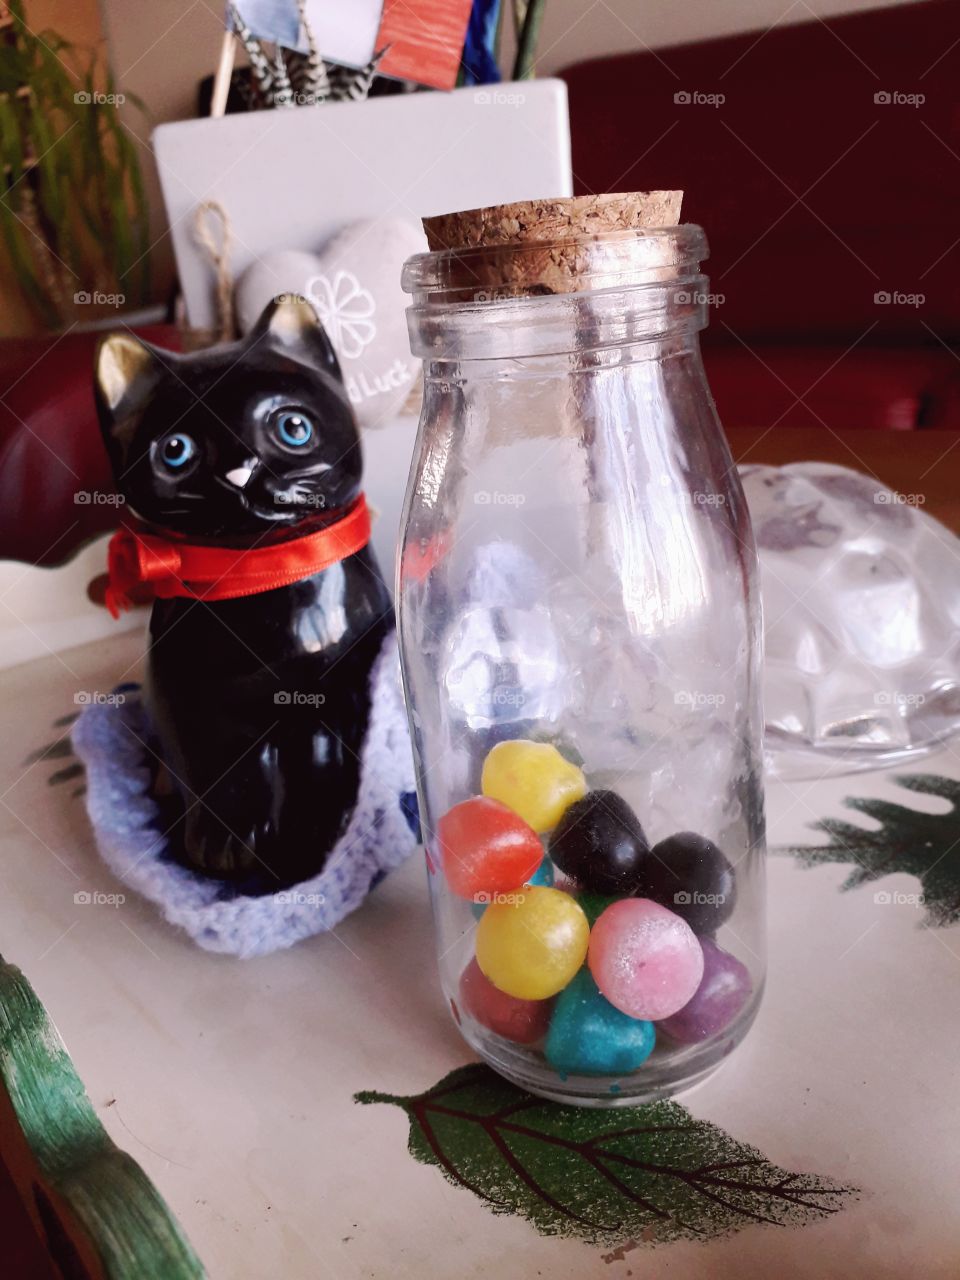 Cute cat and botte of candy